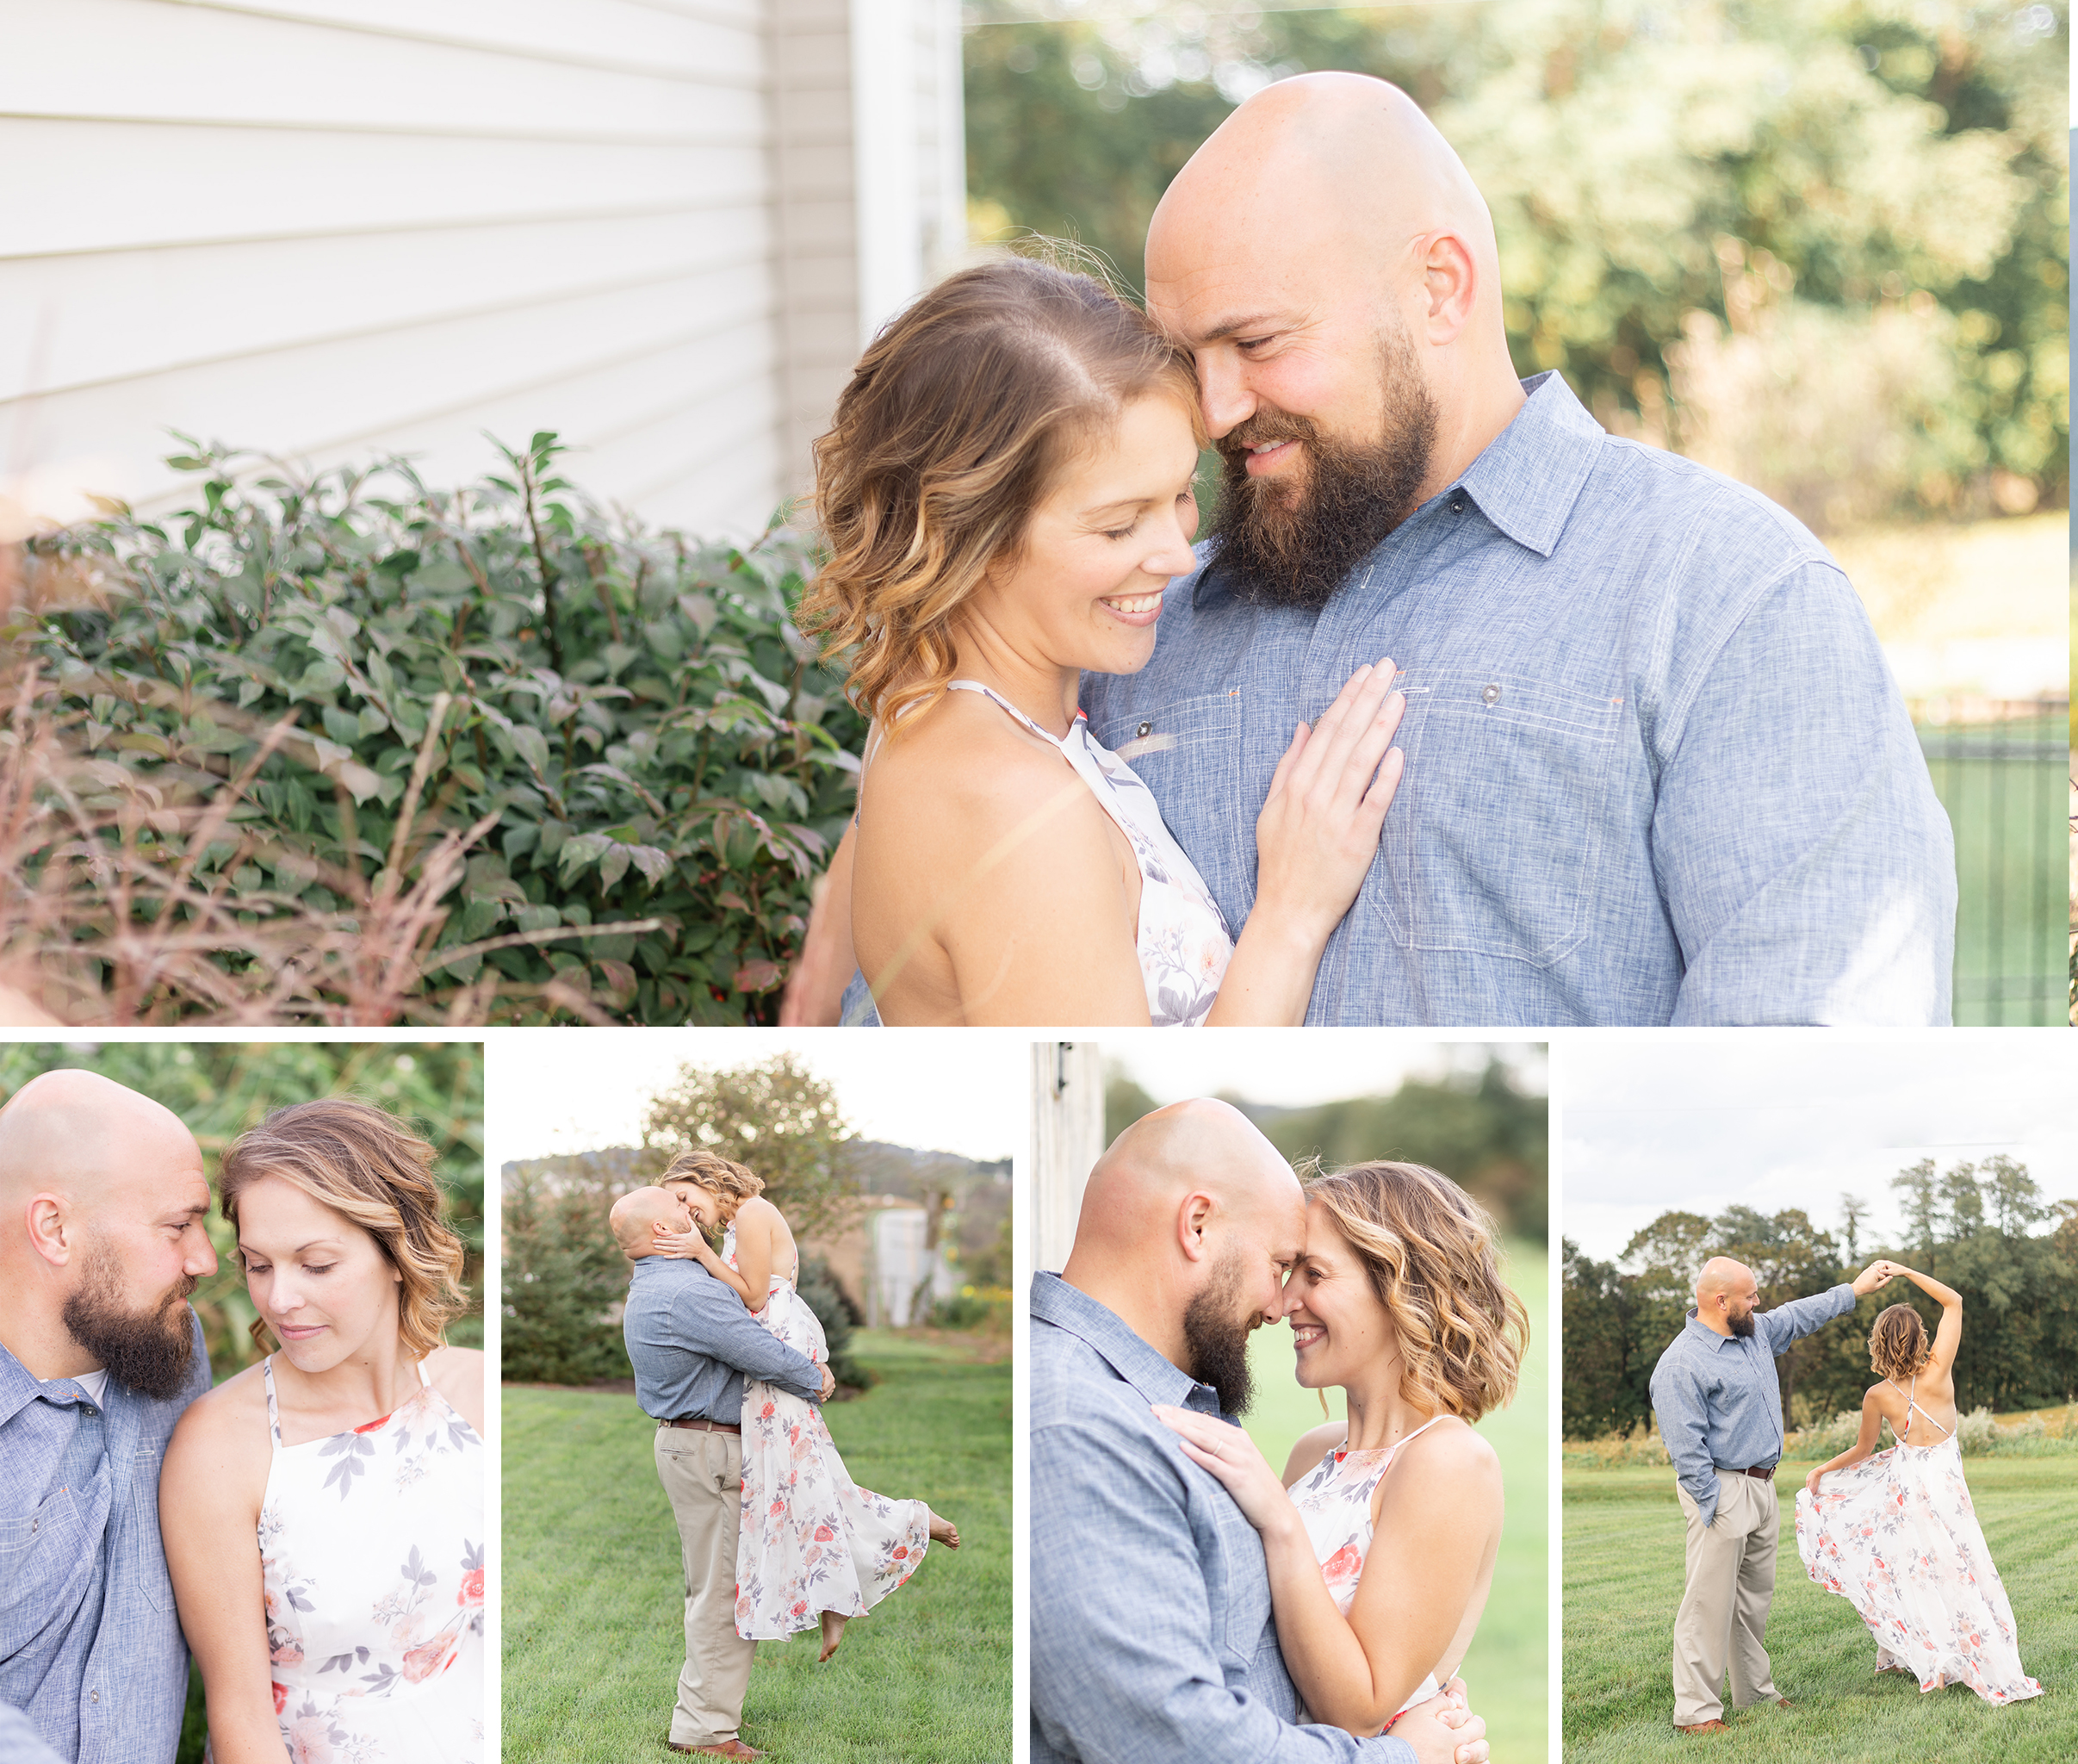 Five Images of Megan and Dave Yohn for their Anniversary Session in Red Lion, PA